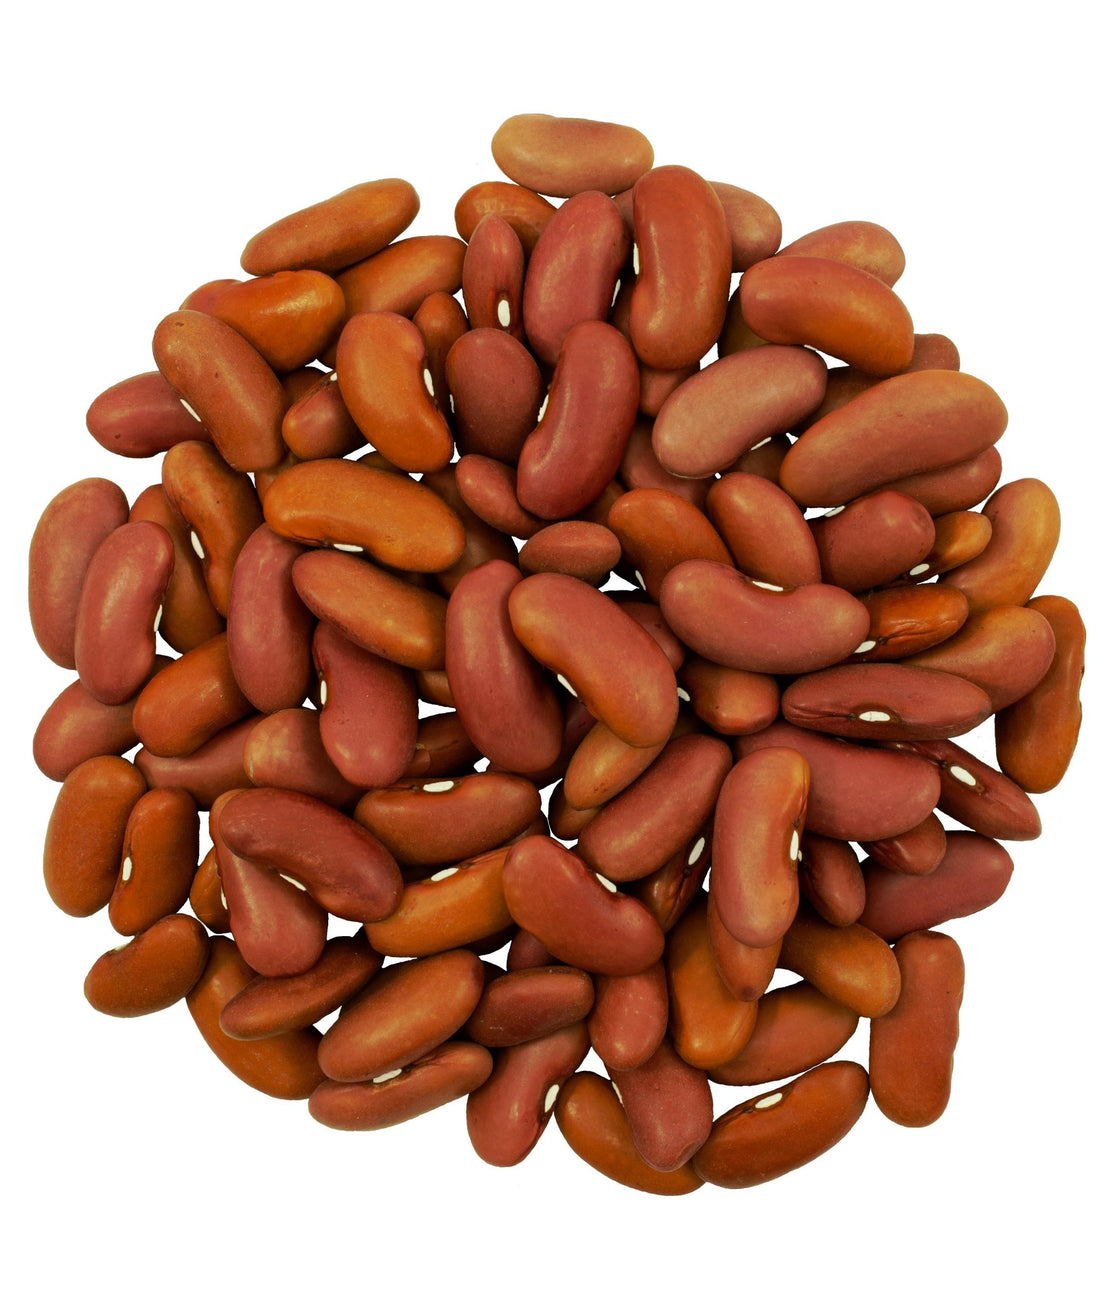 Clear Creek Kidney Beans, Light Red, 4 LBS